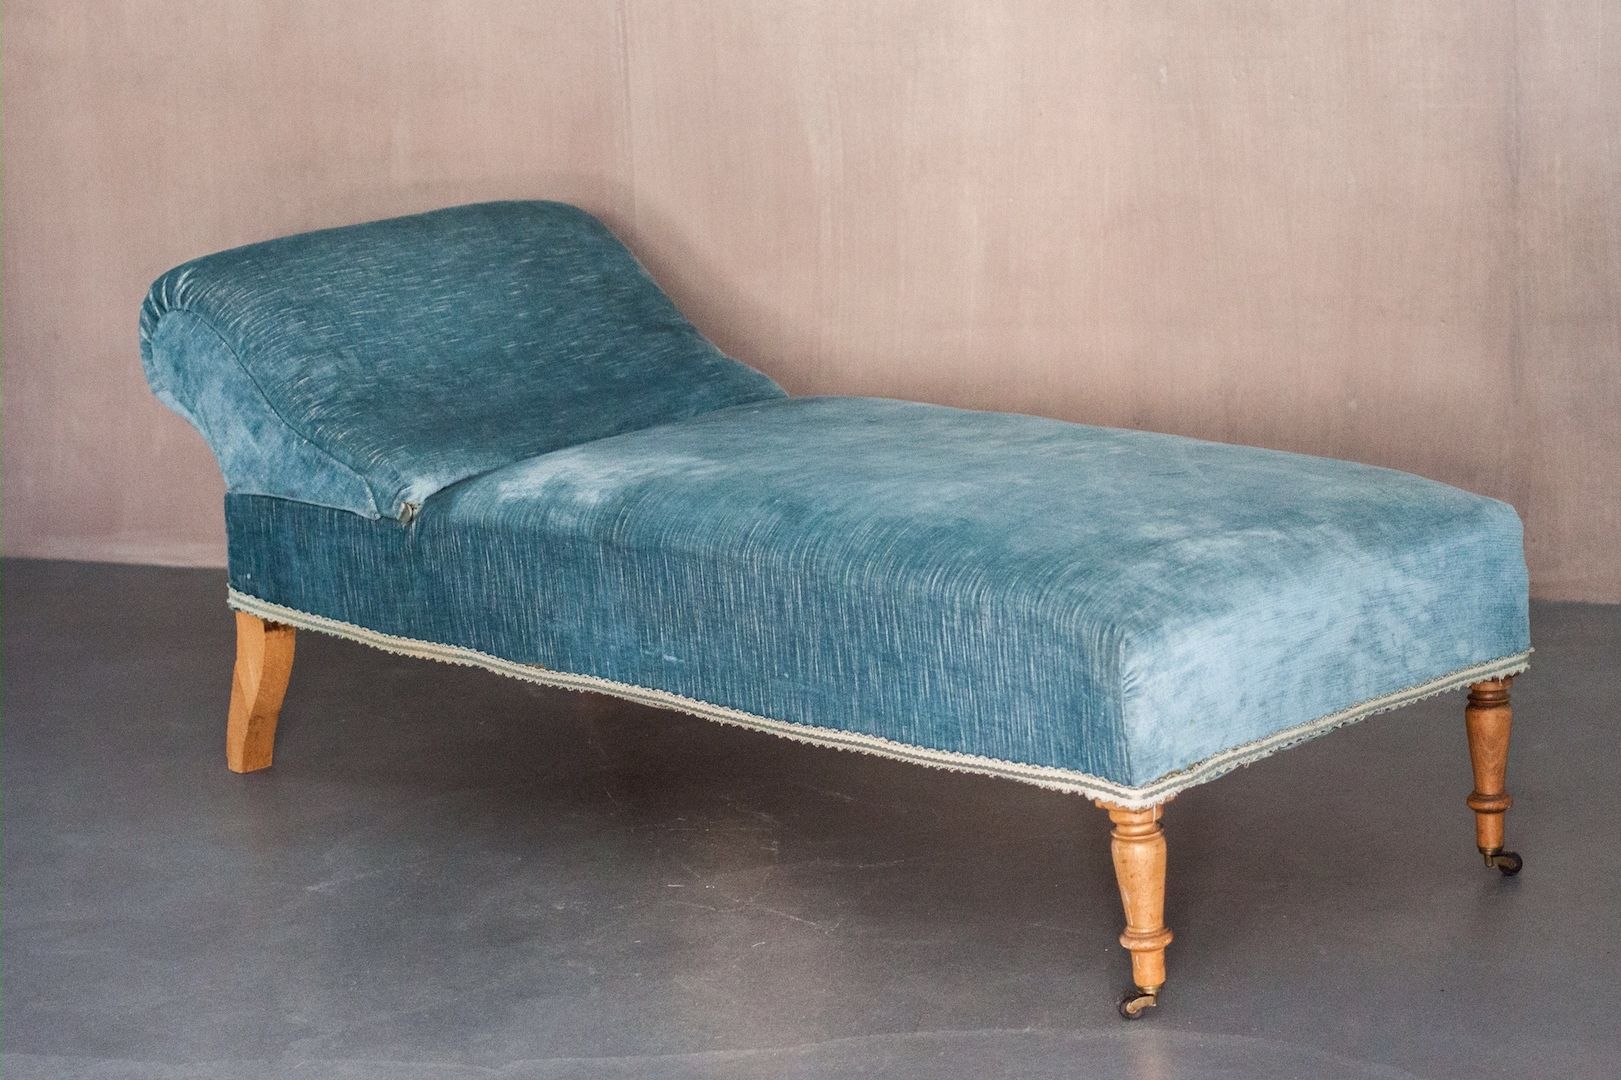 Well Known Vintage Chaise Lounge With Sky Blue Velvet Upholstery For Sale At Intended For Turquoise Chaise Lounges (View 14 of 15)